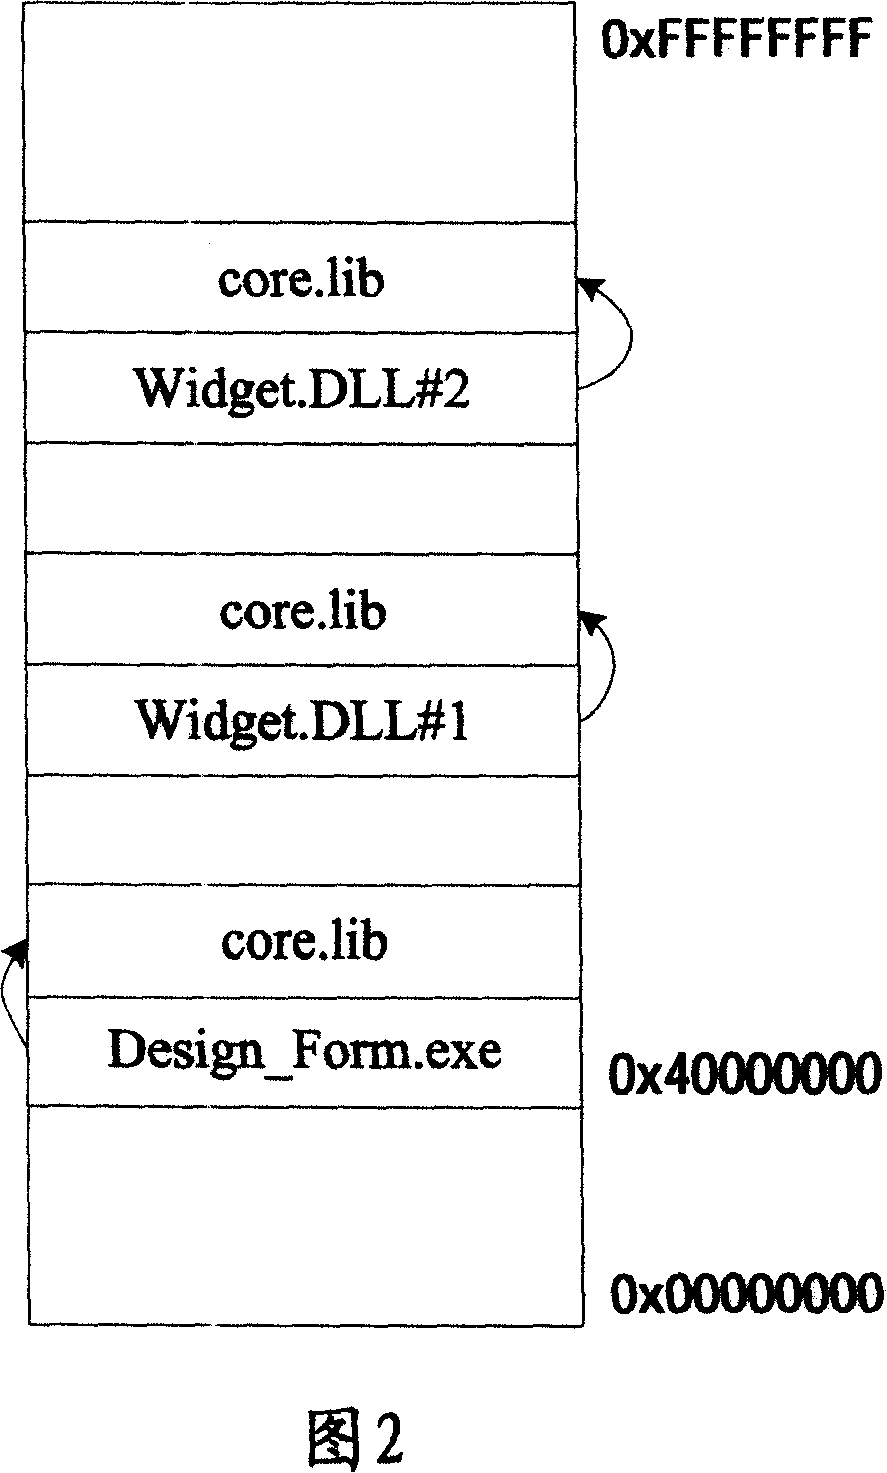 Method for dynamic linking function library sharing static linking function library with primary application